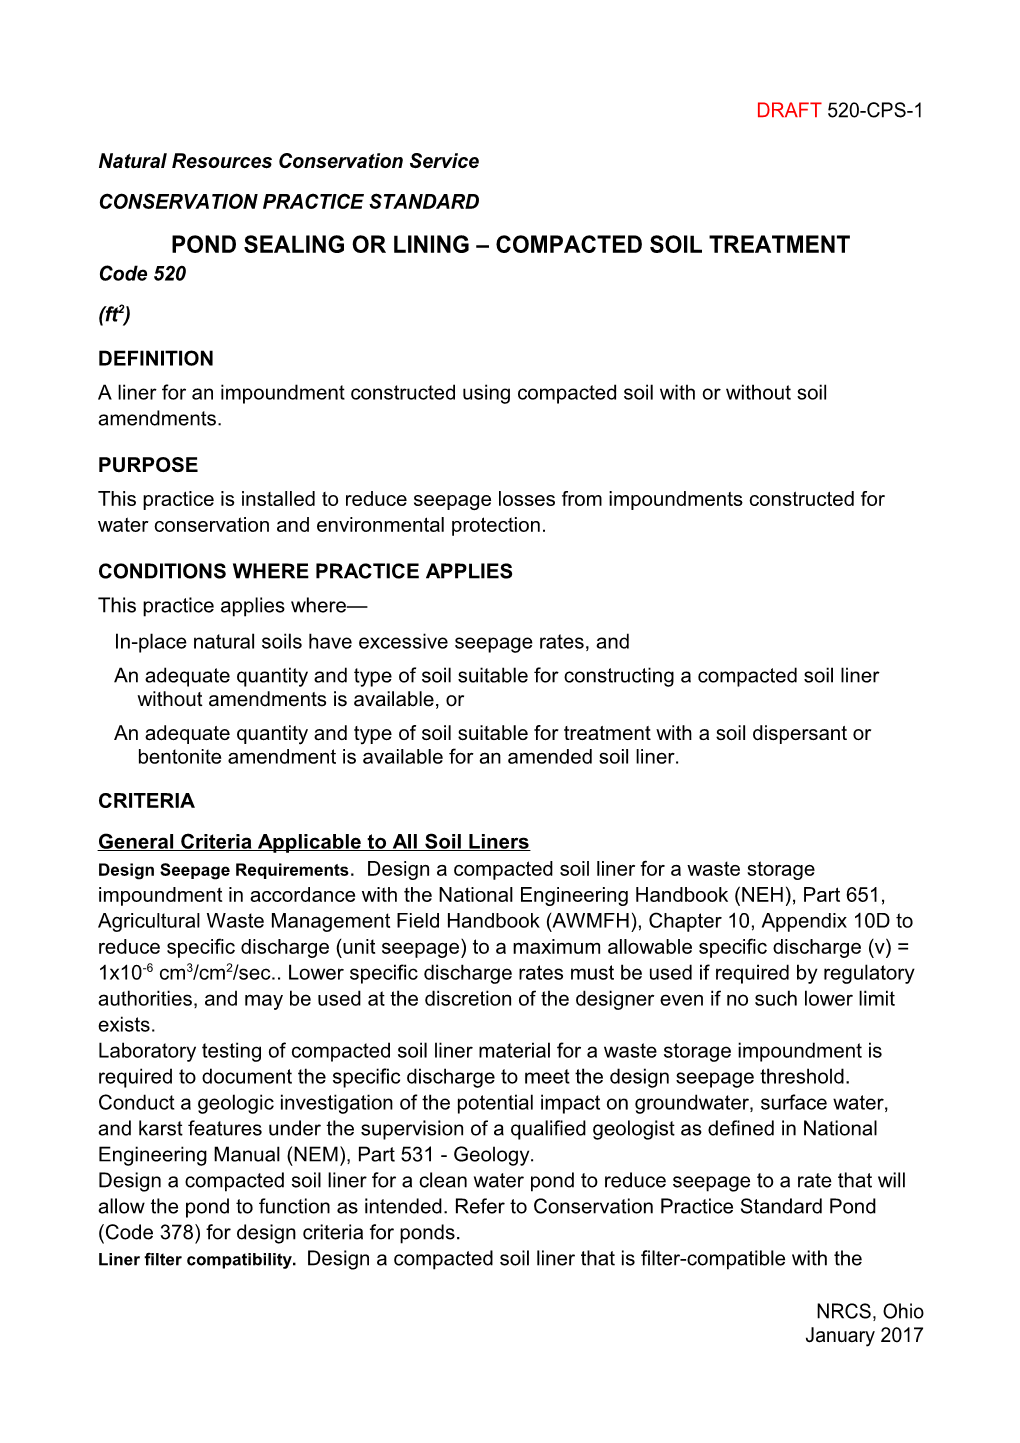 Conservation Practice Standard Pond Sealing Or Lining, Compacted Soil Treatment (Code520)